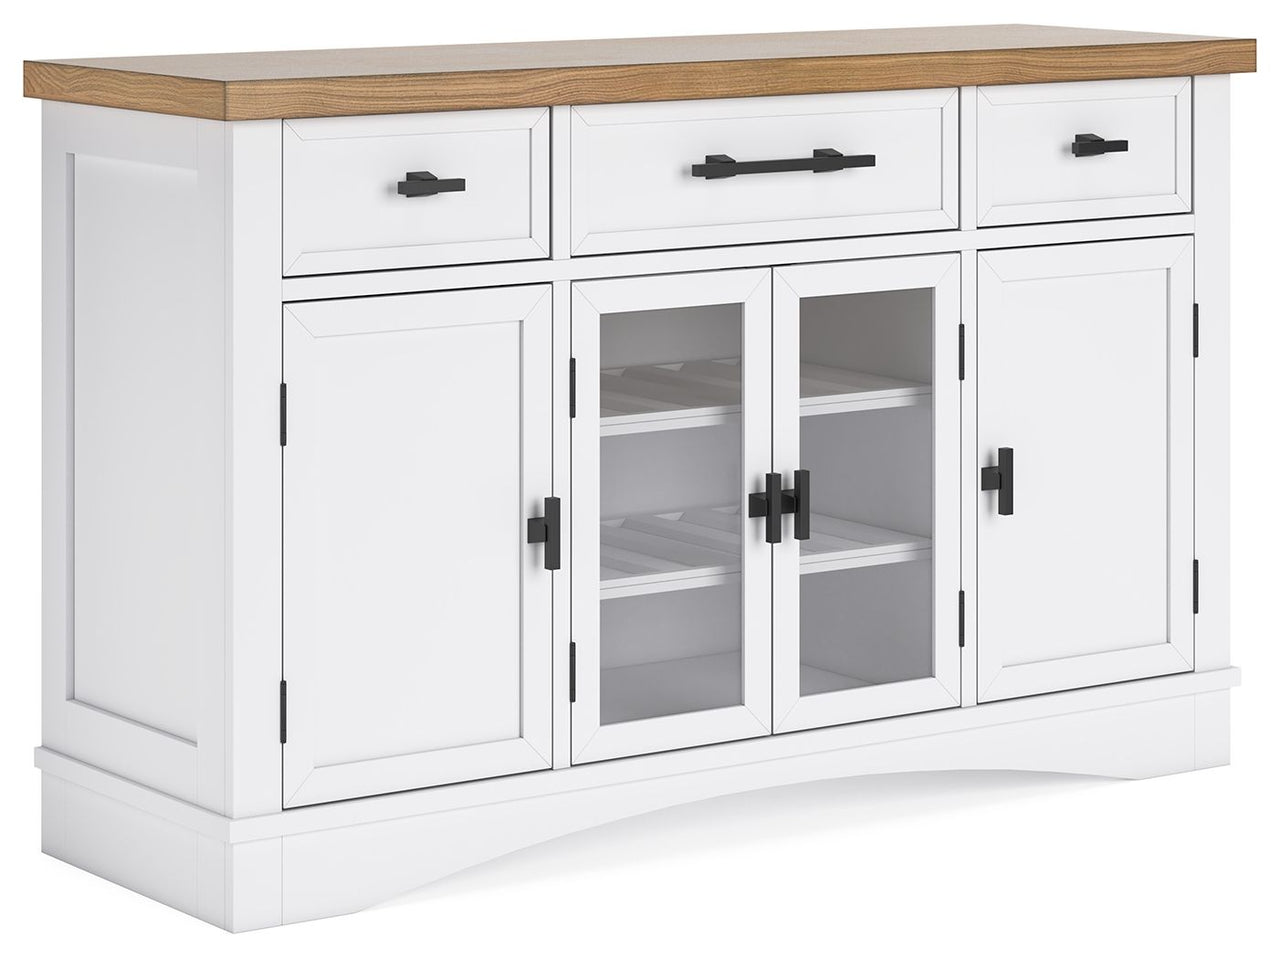 Ashbryn - White / Natural - Dining Room Server - Tony's Home Furnishings